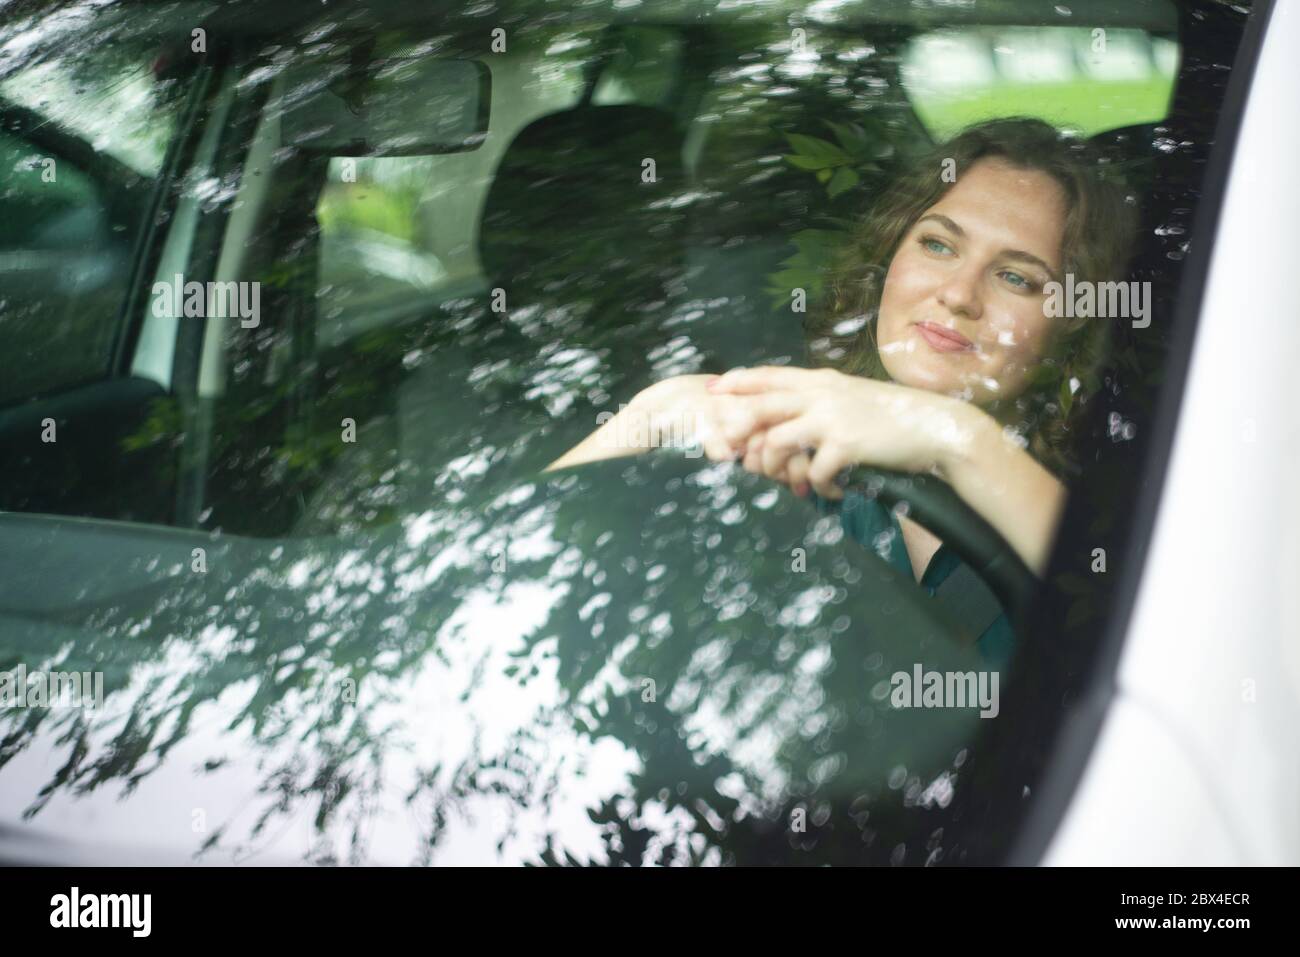 Woman driver driving a car Stock Photo